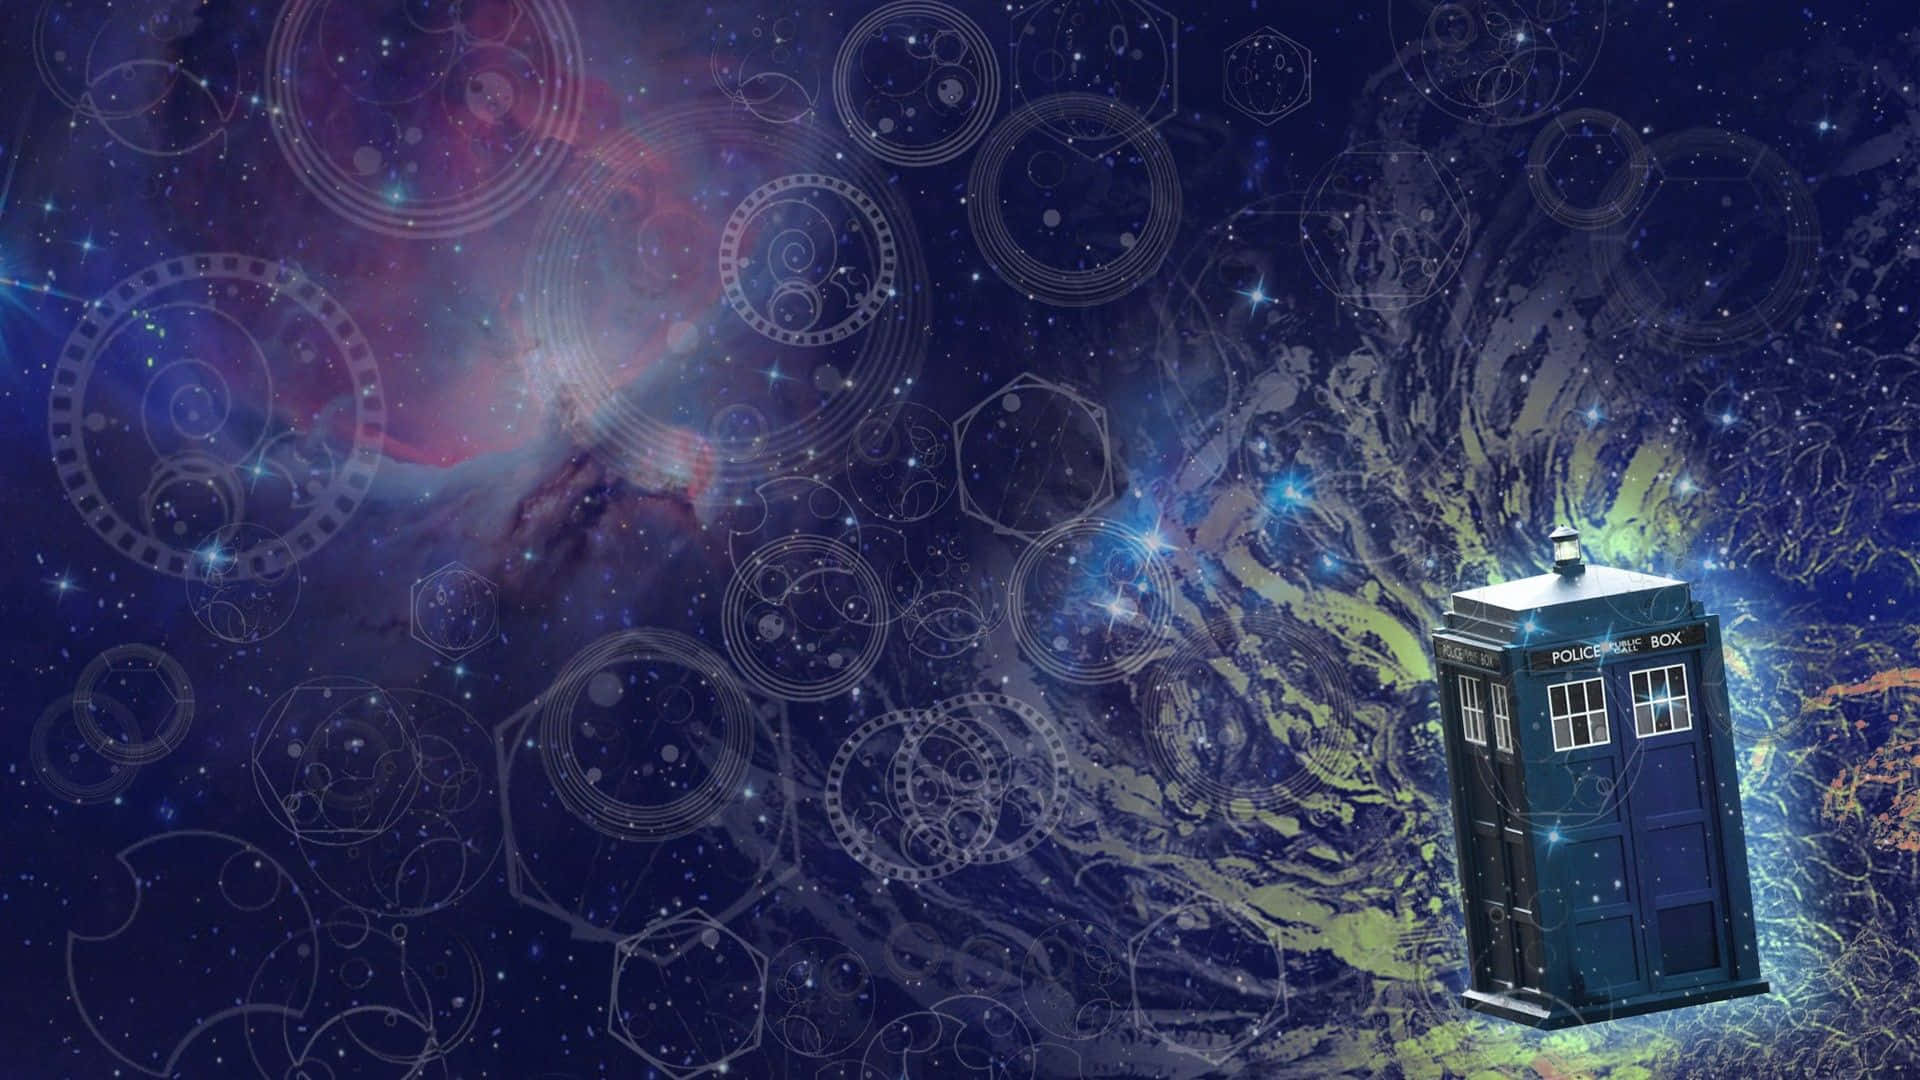 Journey Through Time and Space in the TARDIS Wallpaper